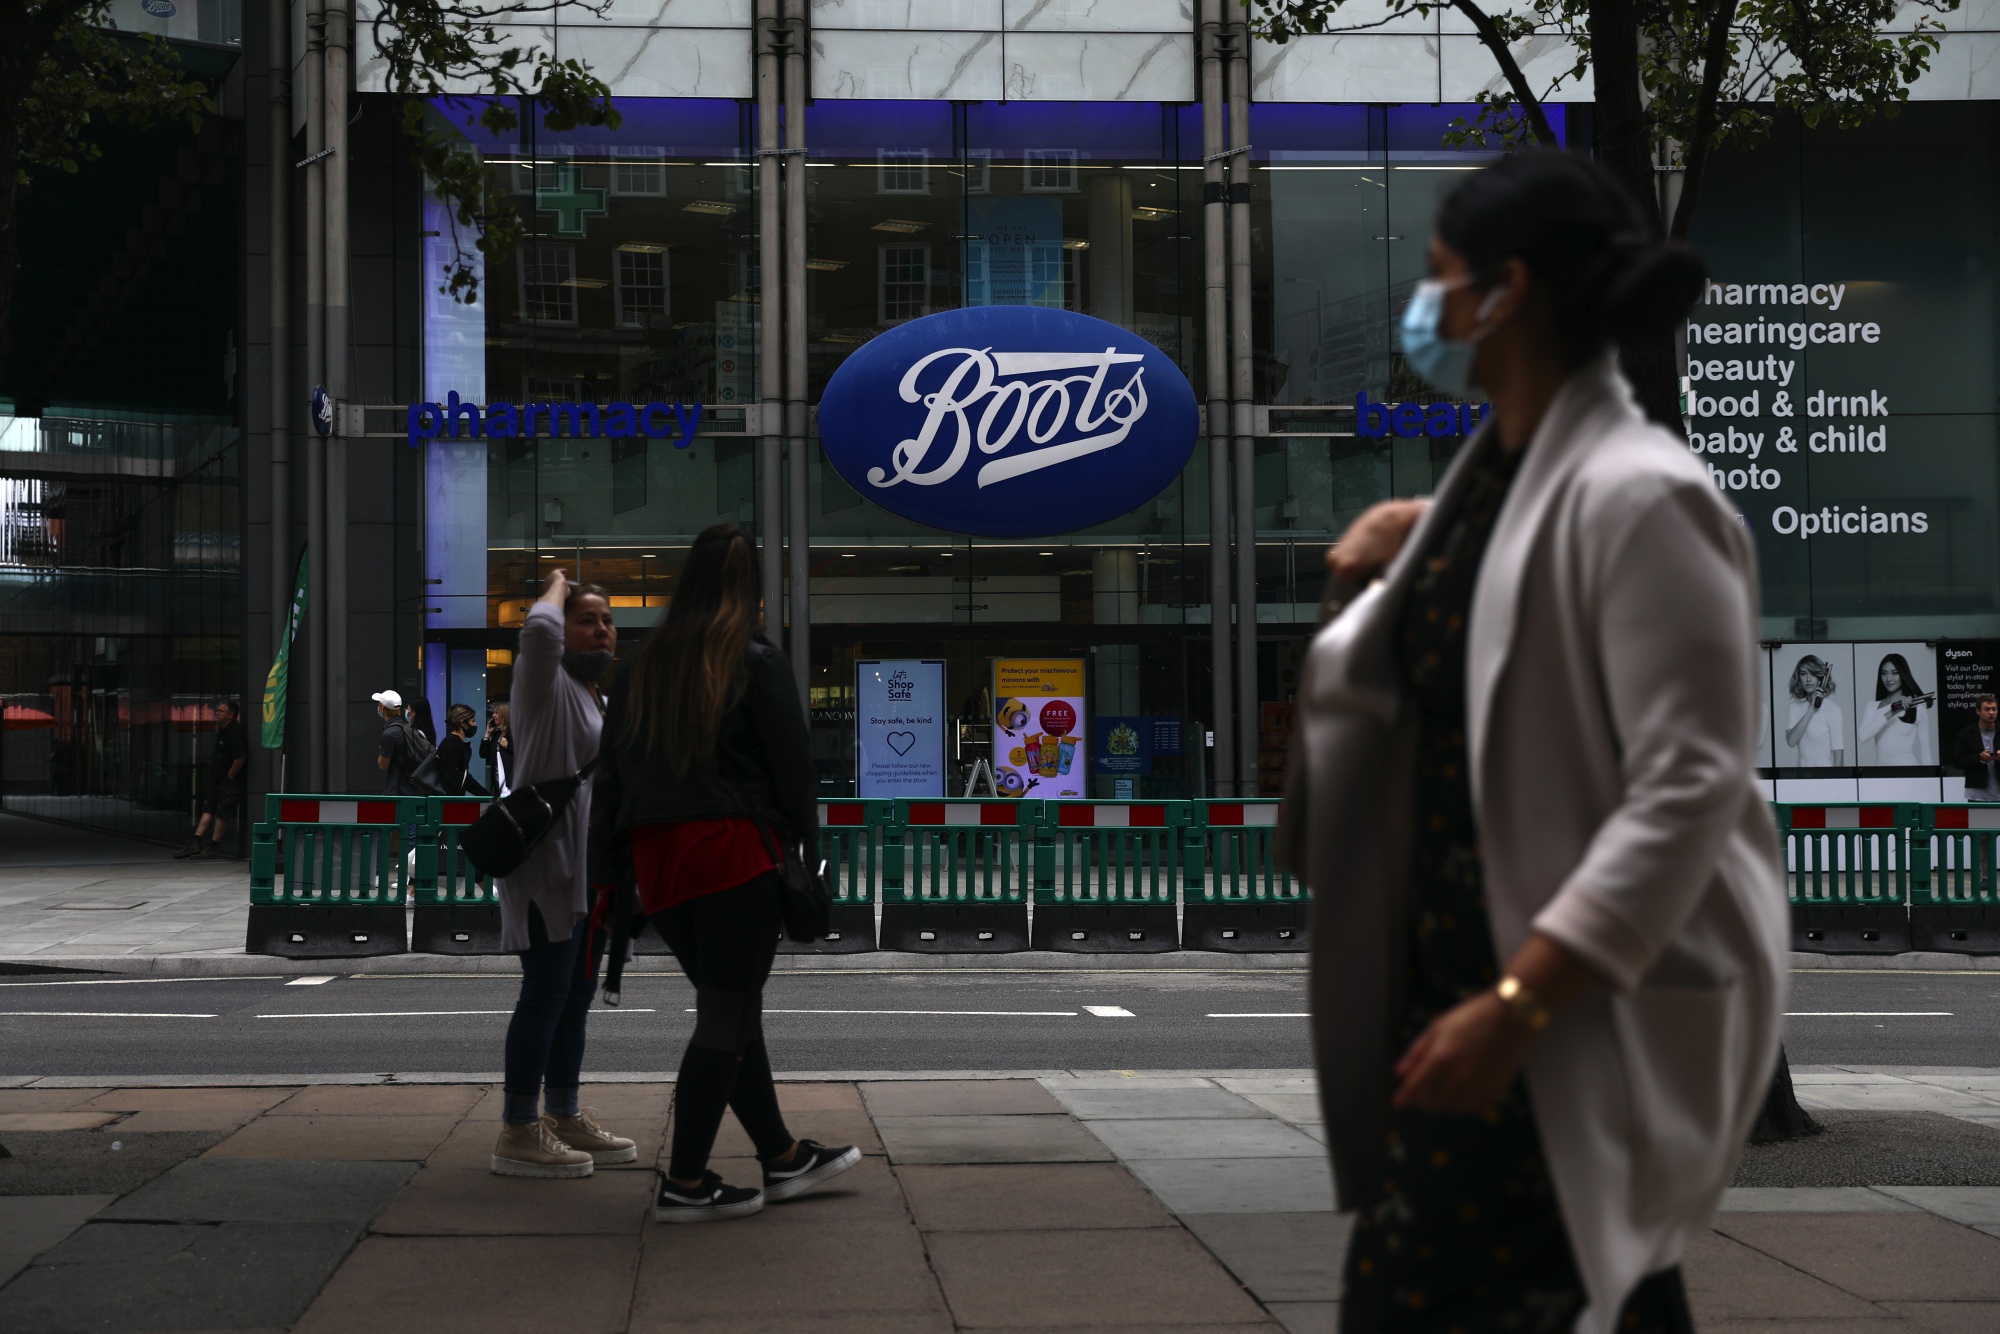 A&nbsp;Boots pharmacists, operated by Walgreens Boots Alliance Inc., on Oxford Street in London, U.K.